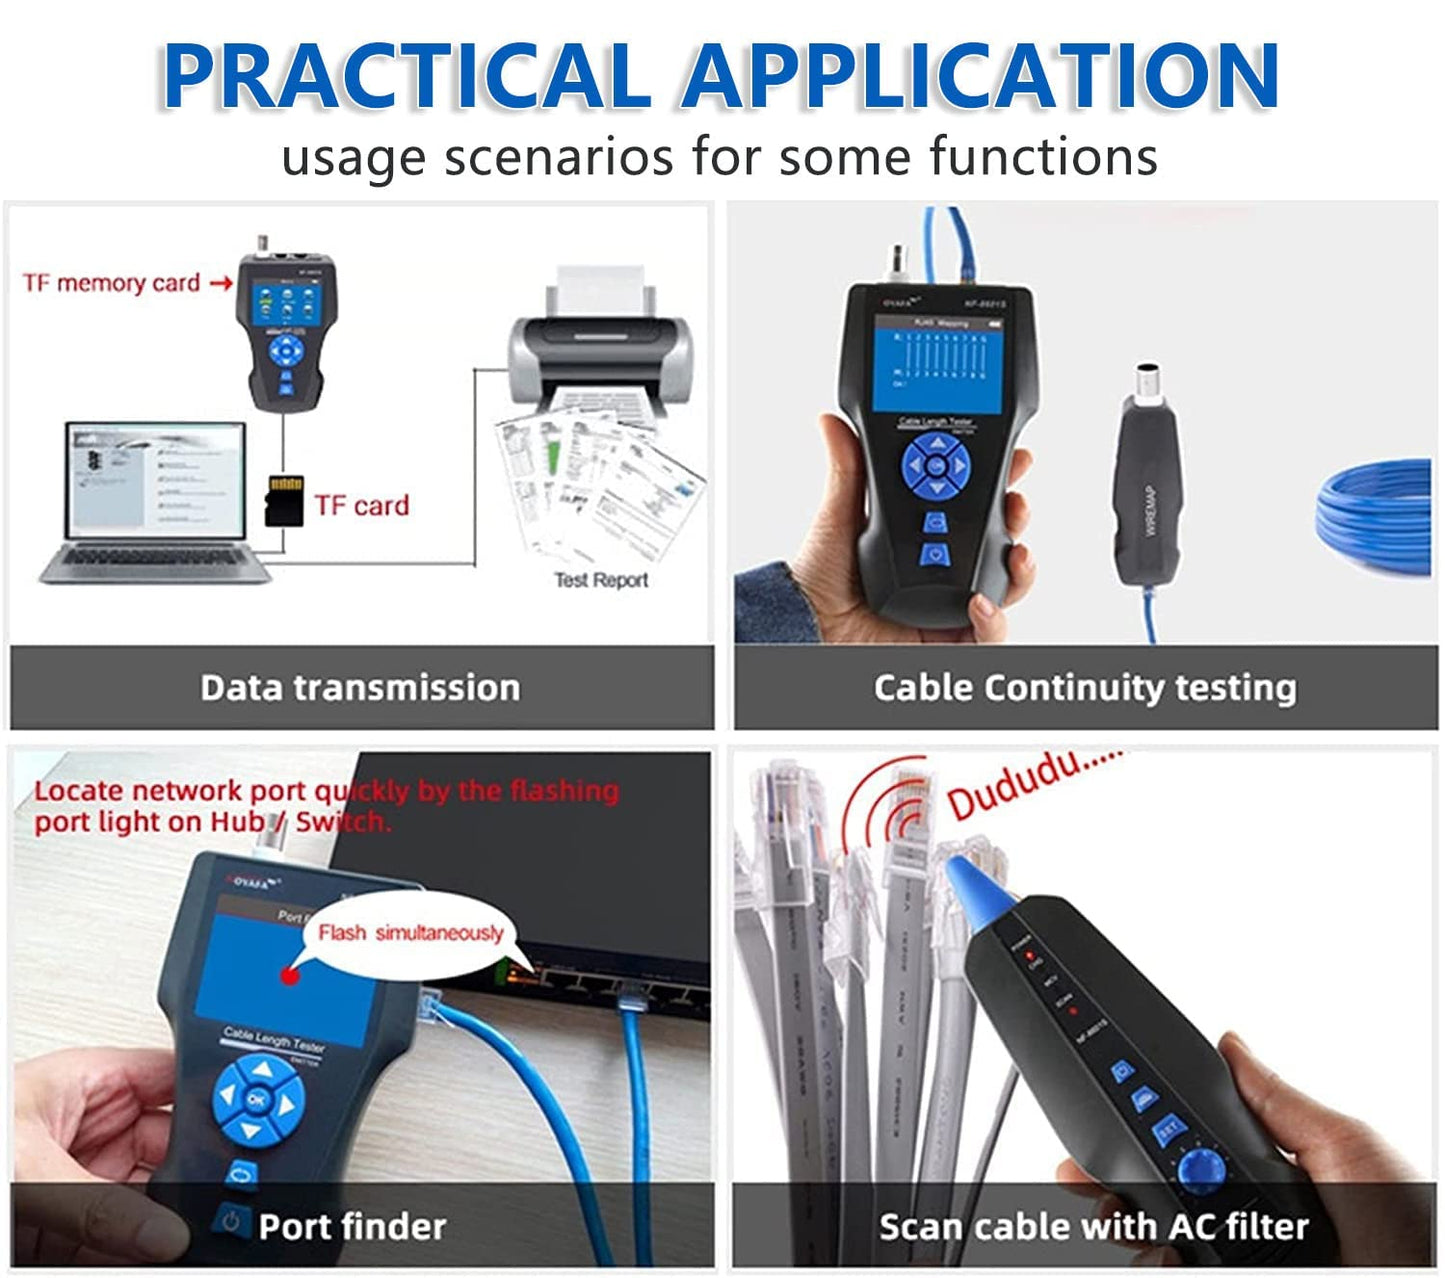 Noyafa NF-8601S Comprehensive Network Cable Tracer Tester Using TDR & with PoE / Ping for RJ45, RJ11, BNC, Metal Cables